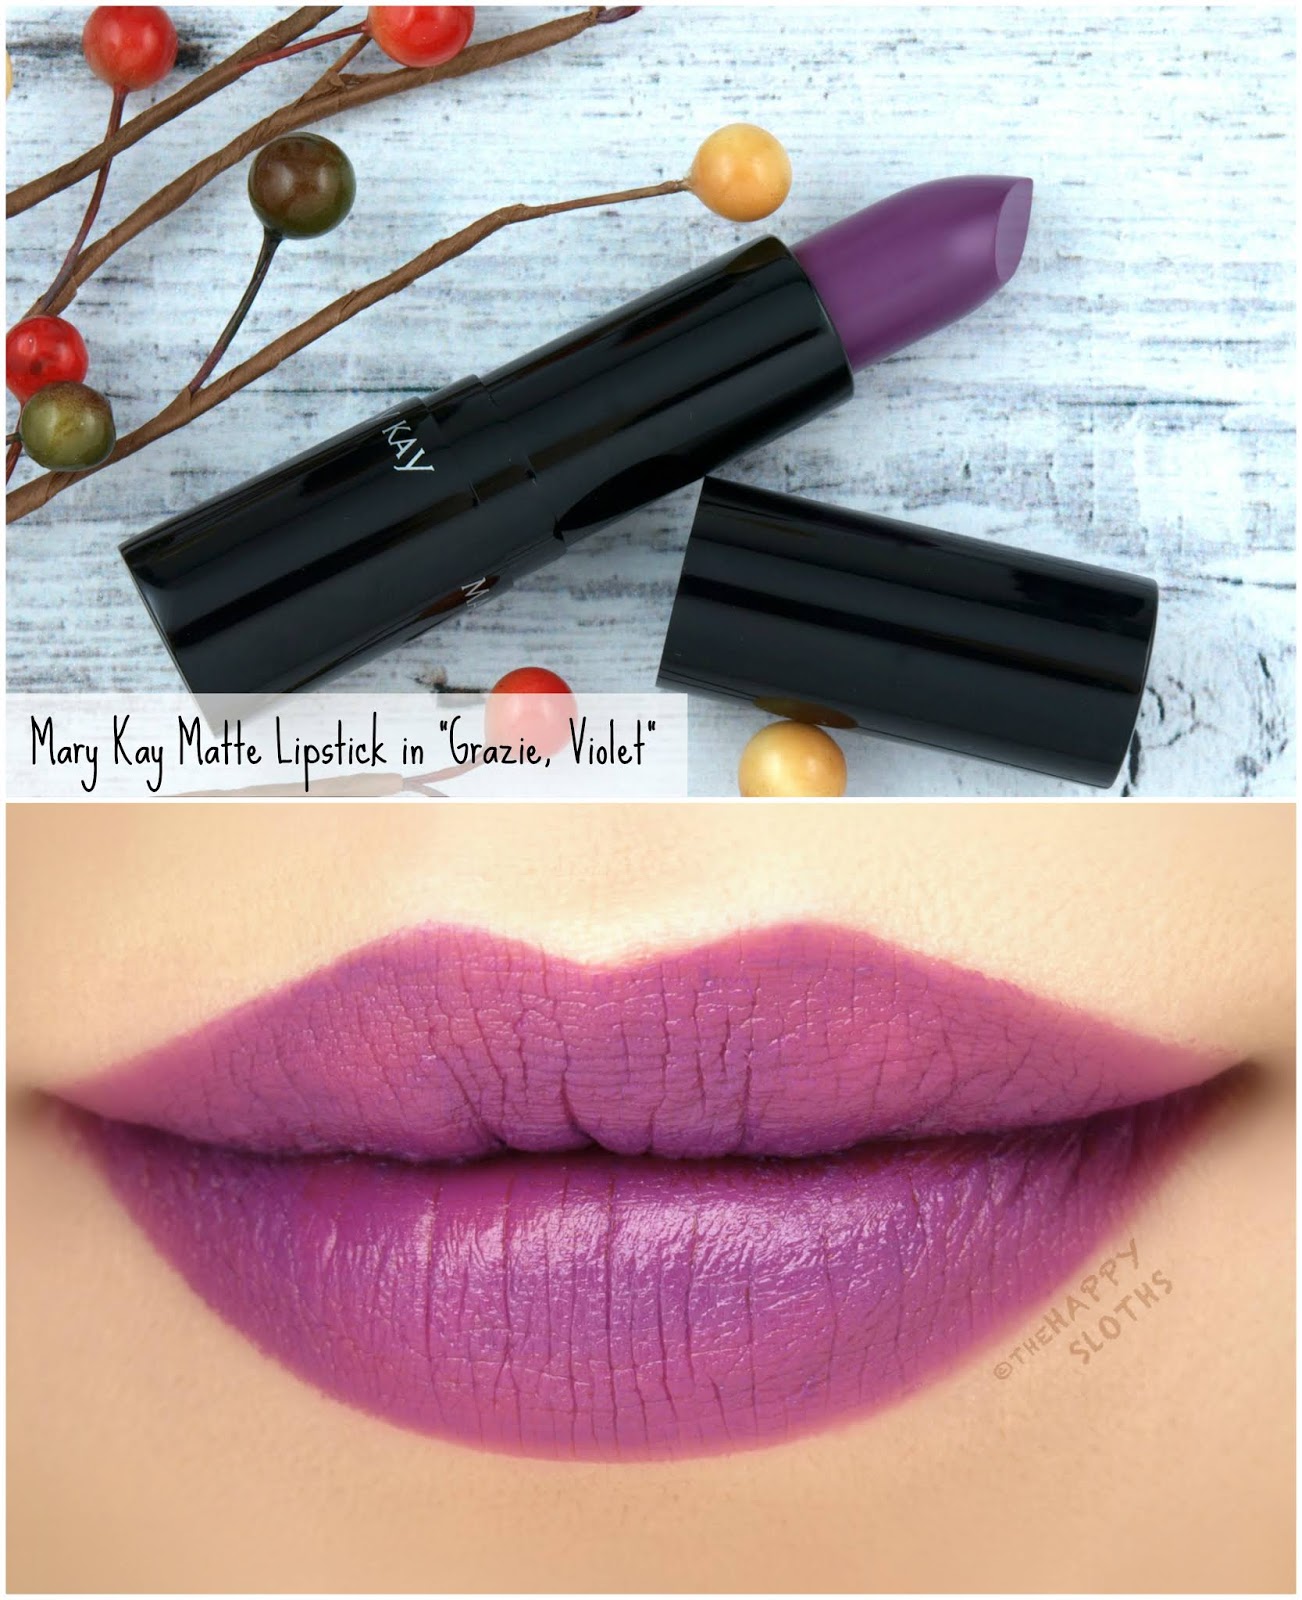 Mary Kay | Fall 2018 Matte Lipstick in "Grazie, Violet": Review and Swatches